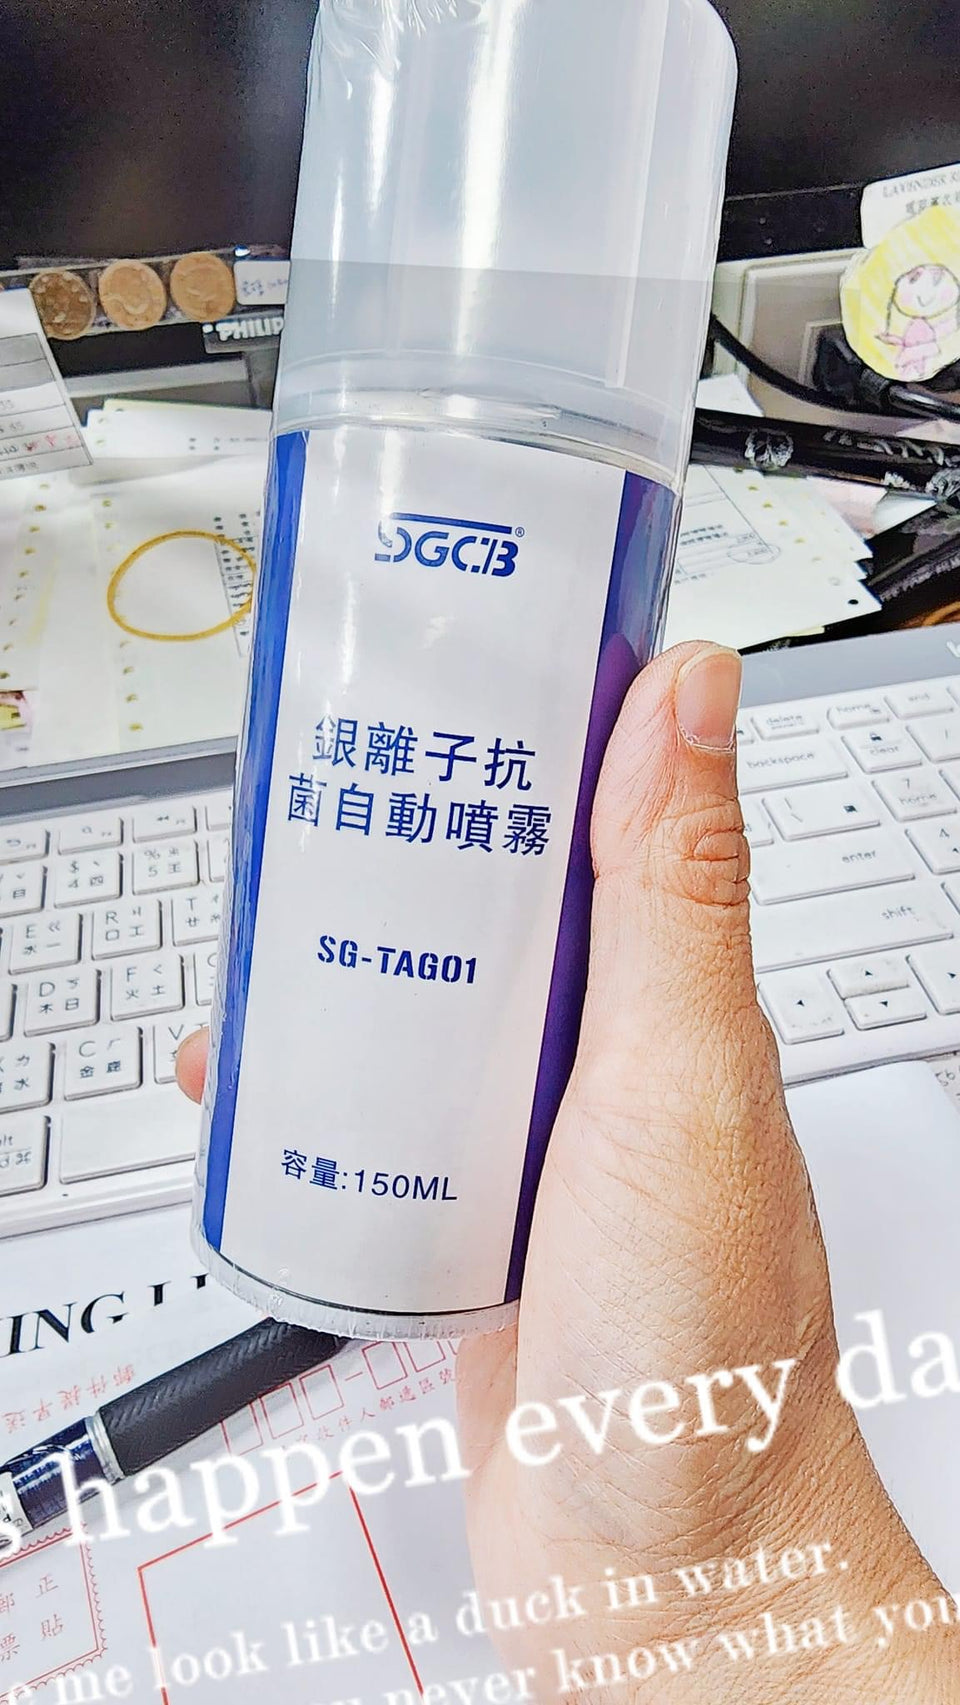 SGCB Compressed air silver ion antimicrobial spray can canned pressurized air for dusting and cleaning purposes